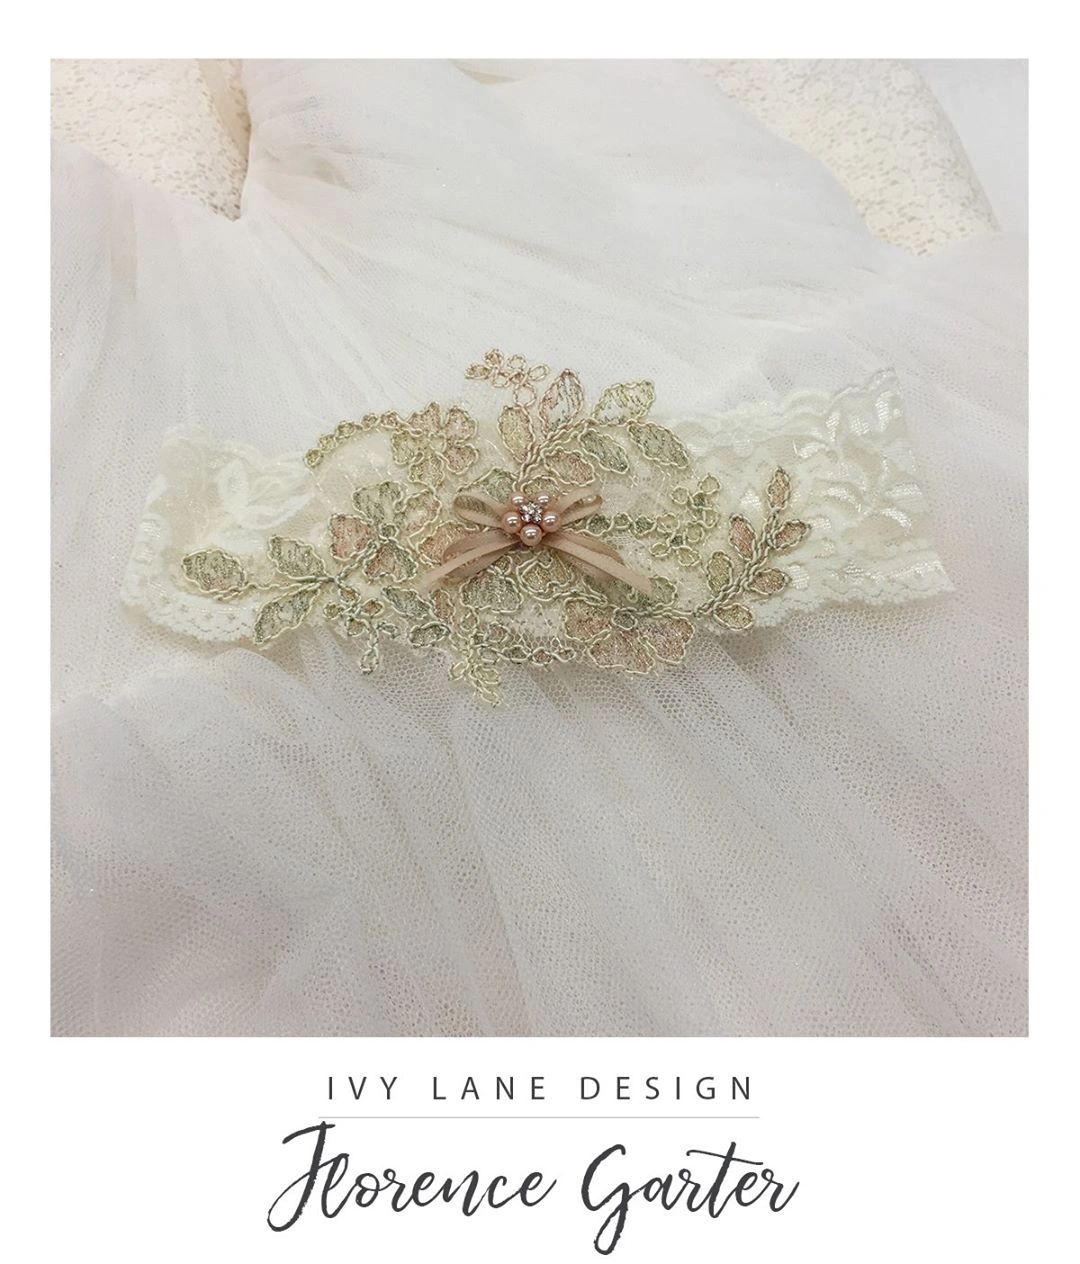 vy Lane
Garters, guest books and pens, flower girls baskets, ring bearer pillows, toasting flutes, s